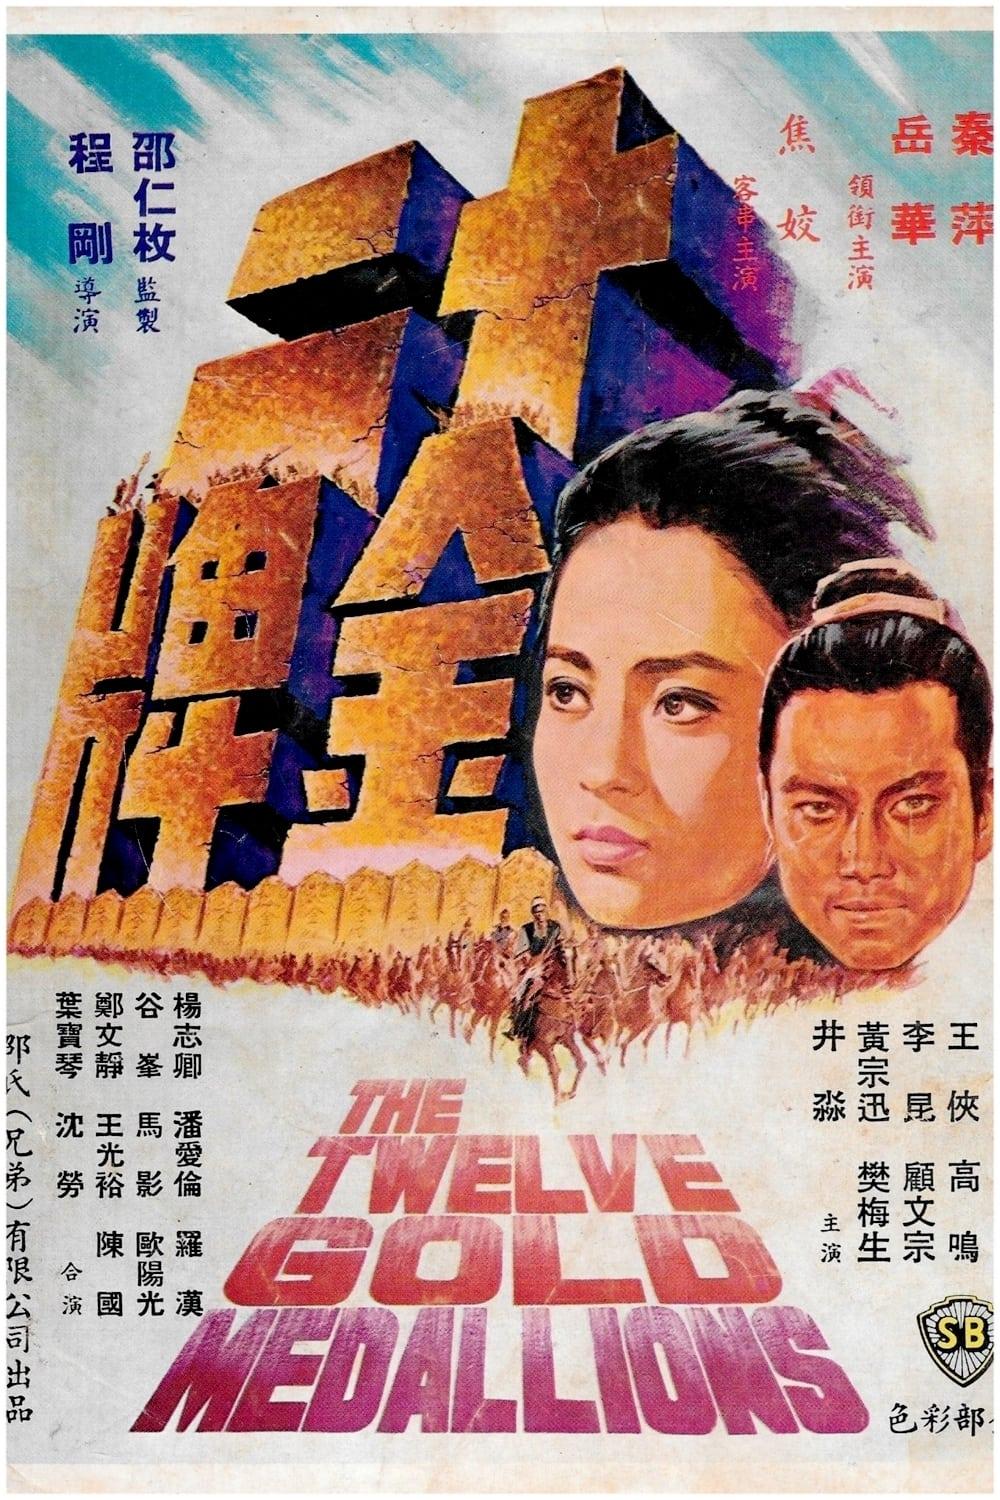 The Twelve Gold Medallions poster